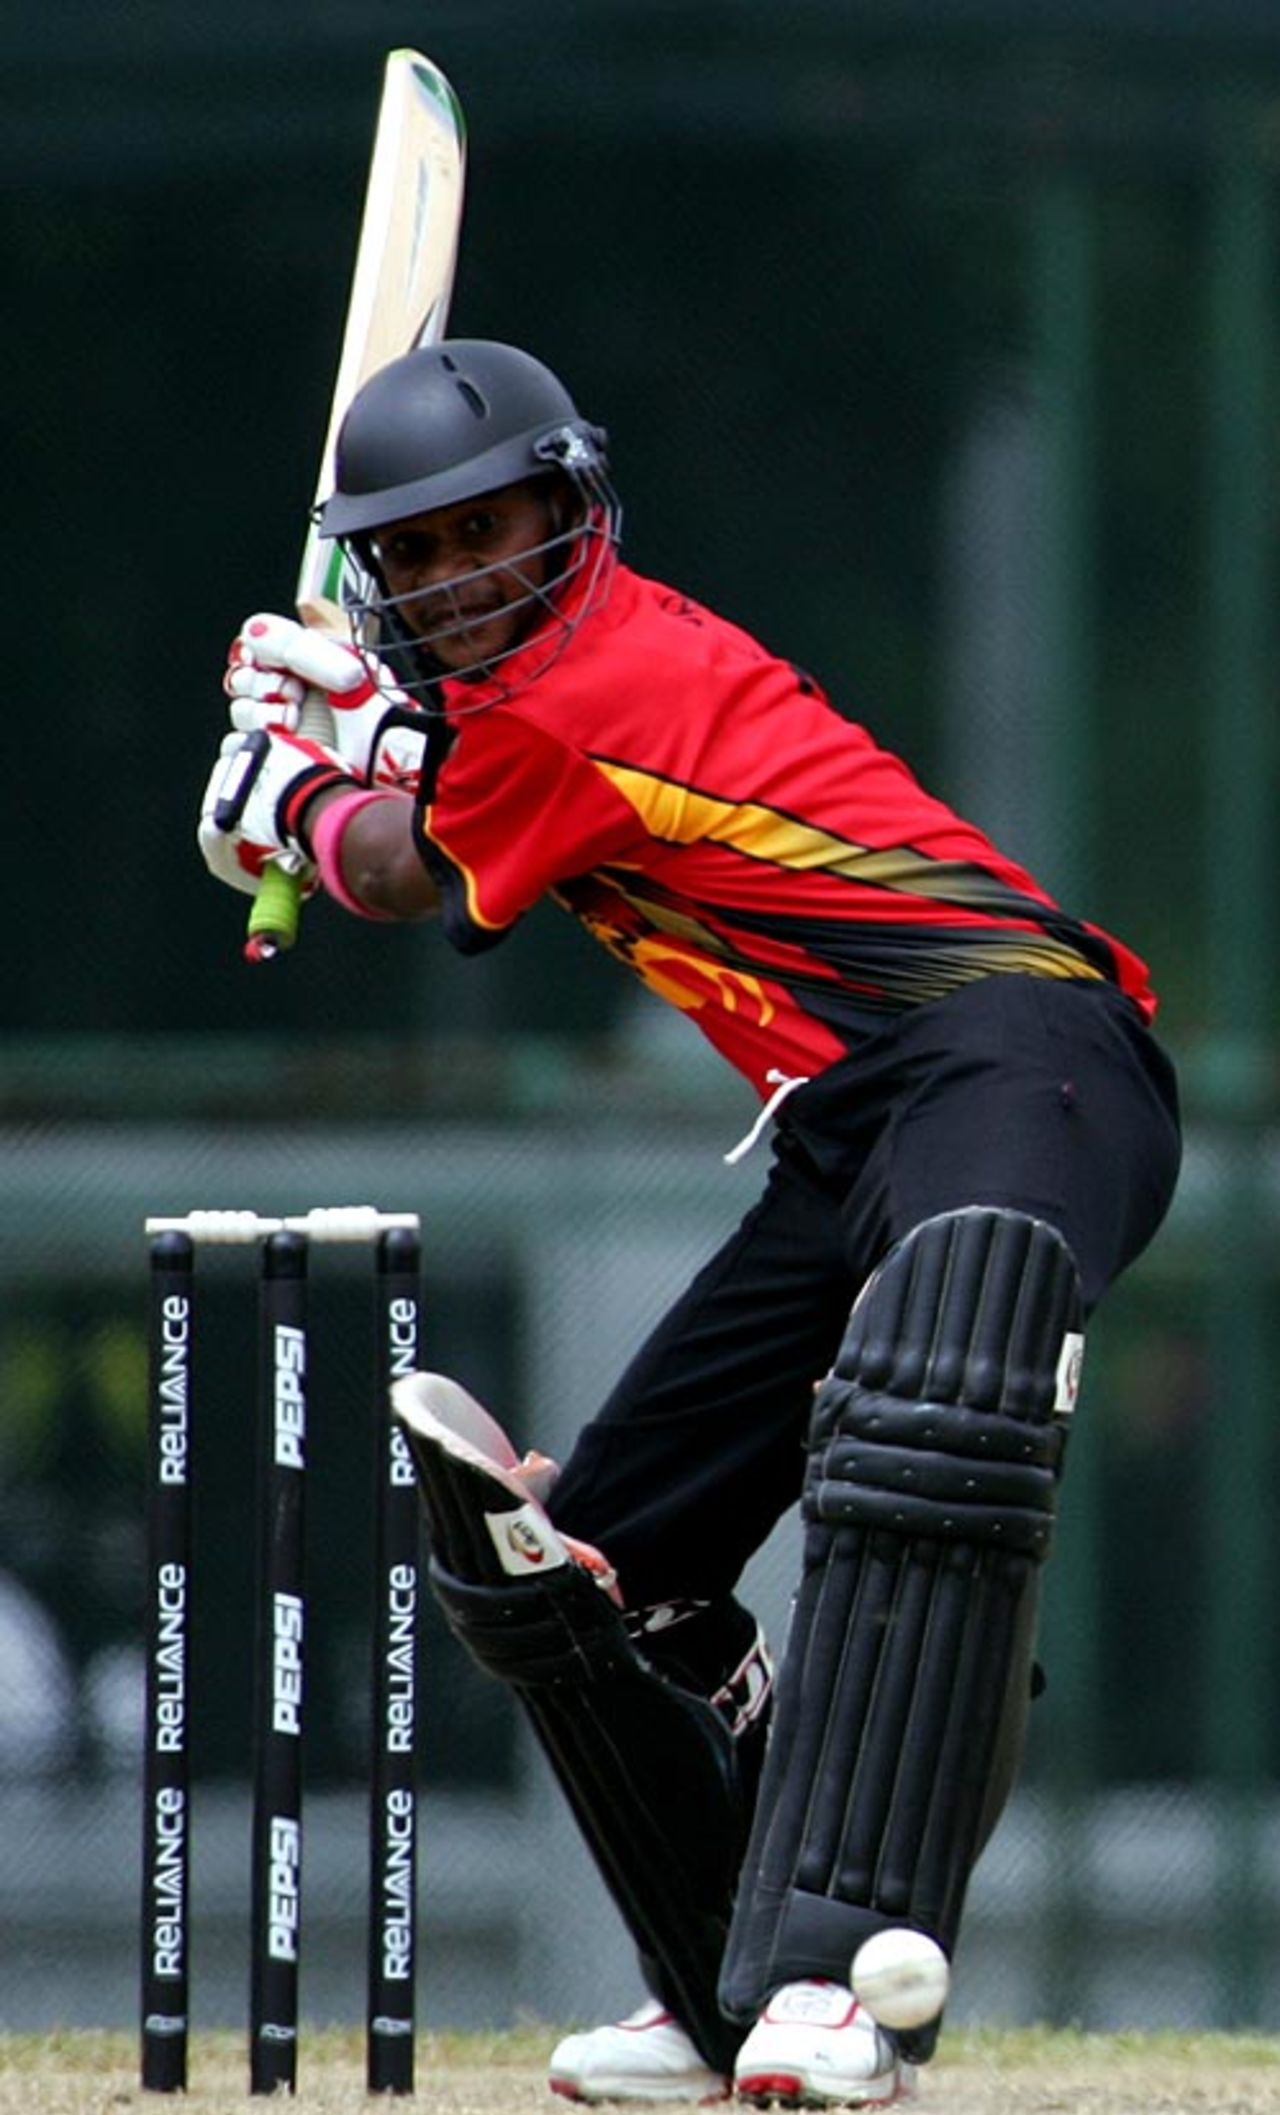 Arua Dikana winds up to play a shot, Papua New Guinea Under-19s v West Indies Under-19s, Under-19 World Cup, Kuala Lumpur, February 20, 2008